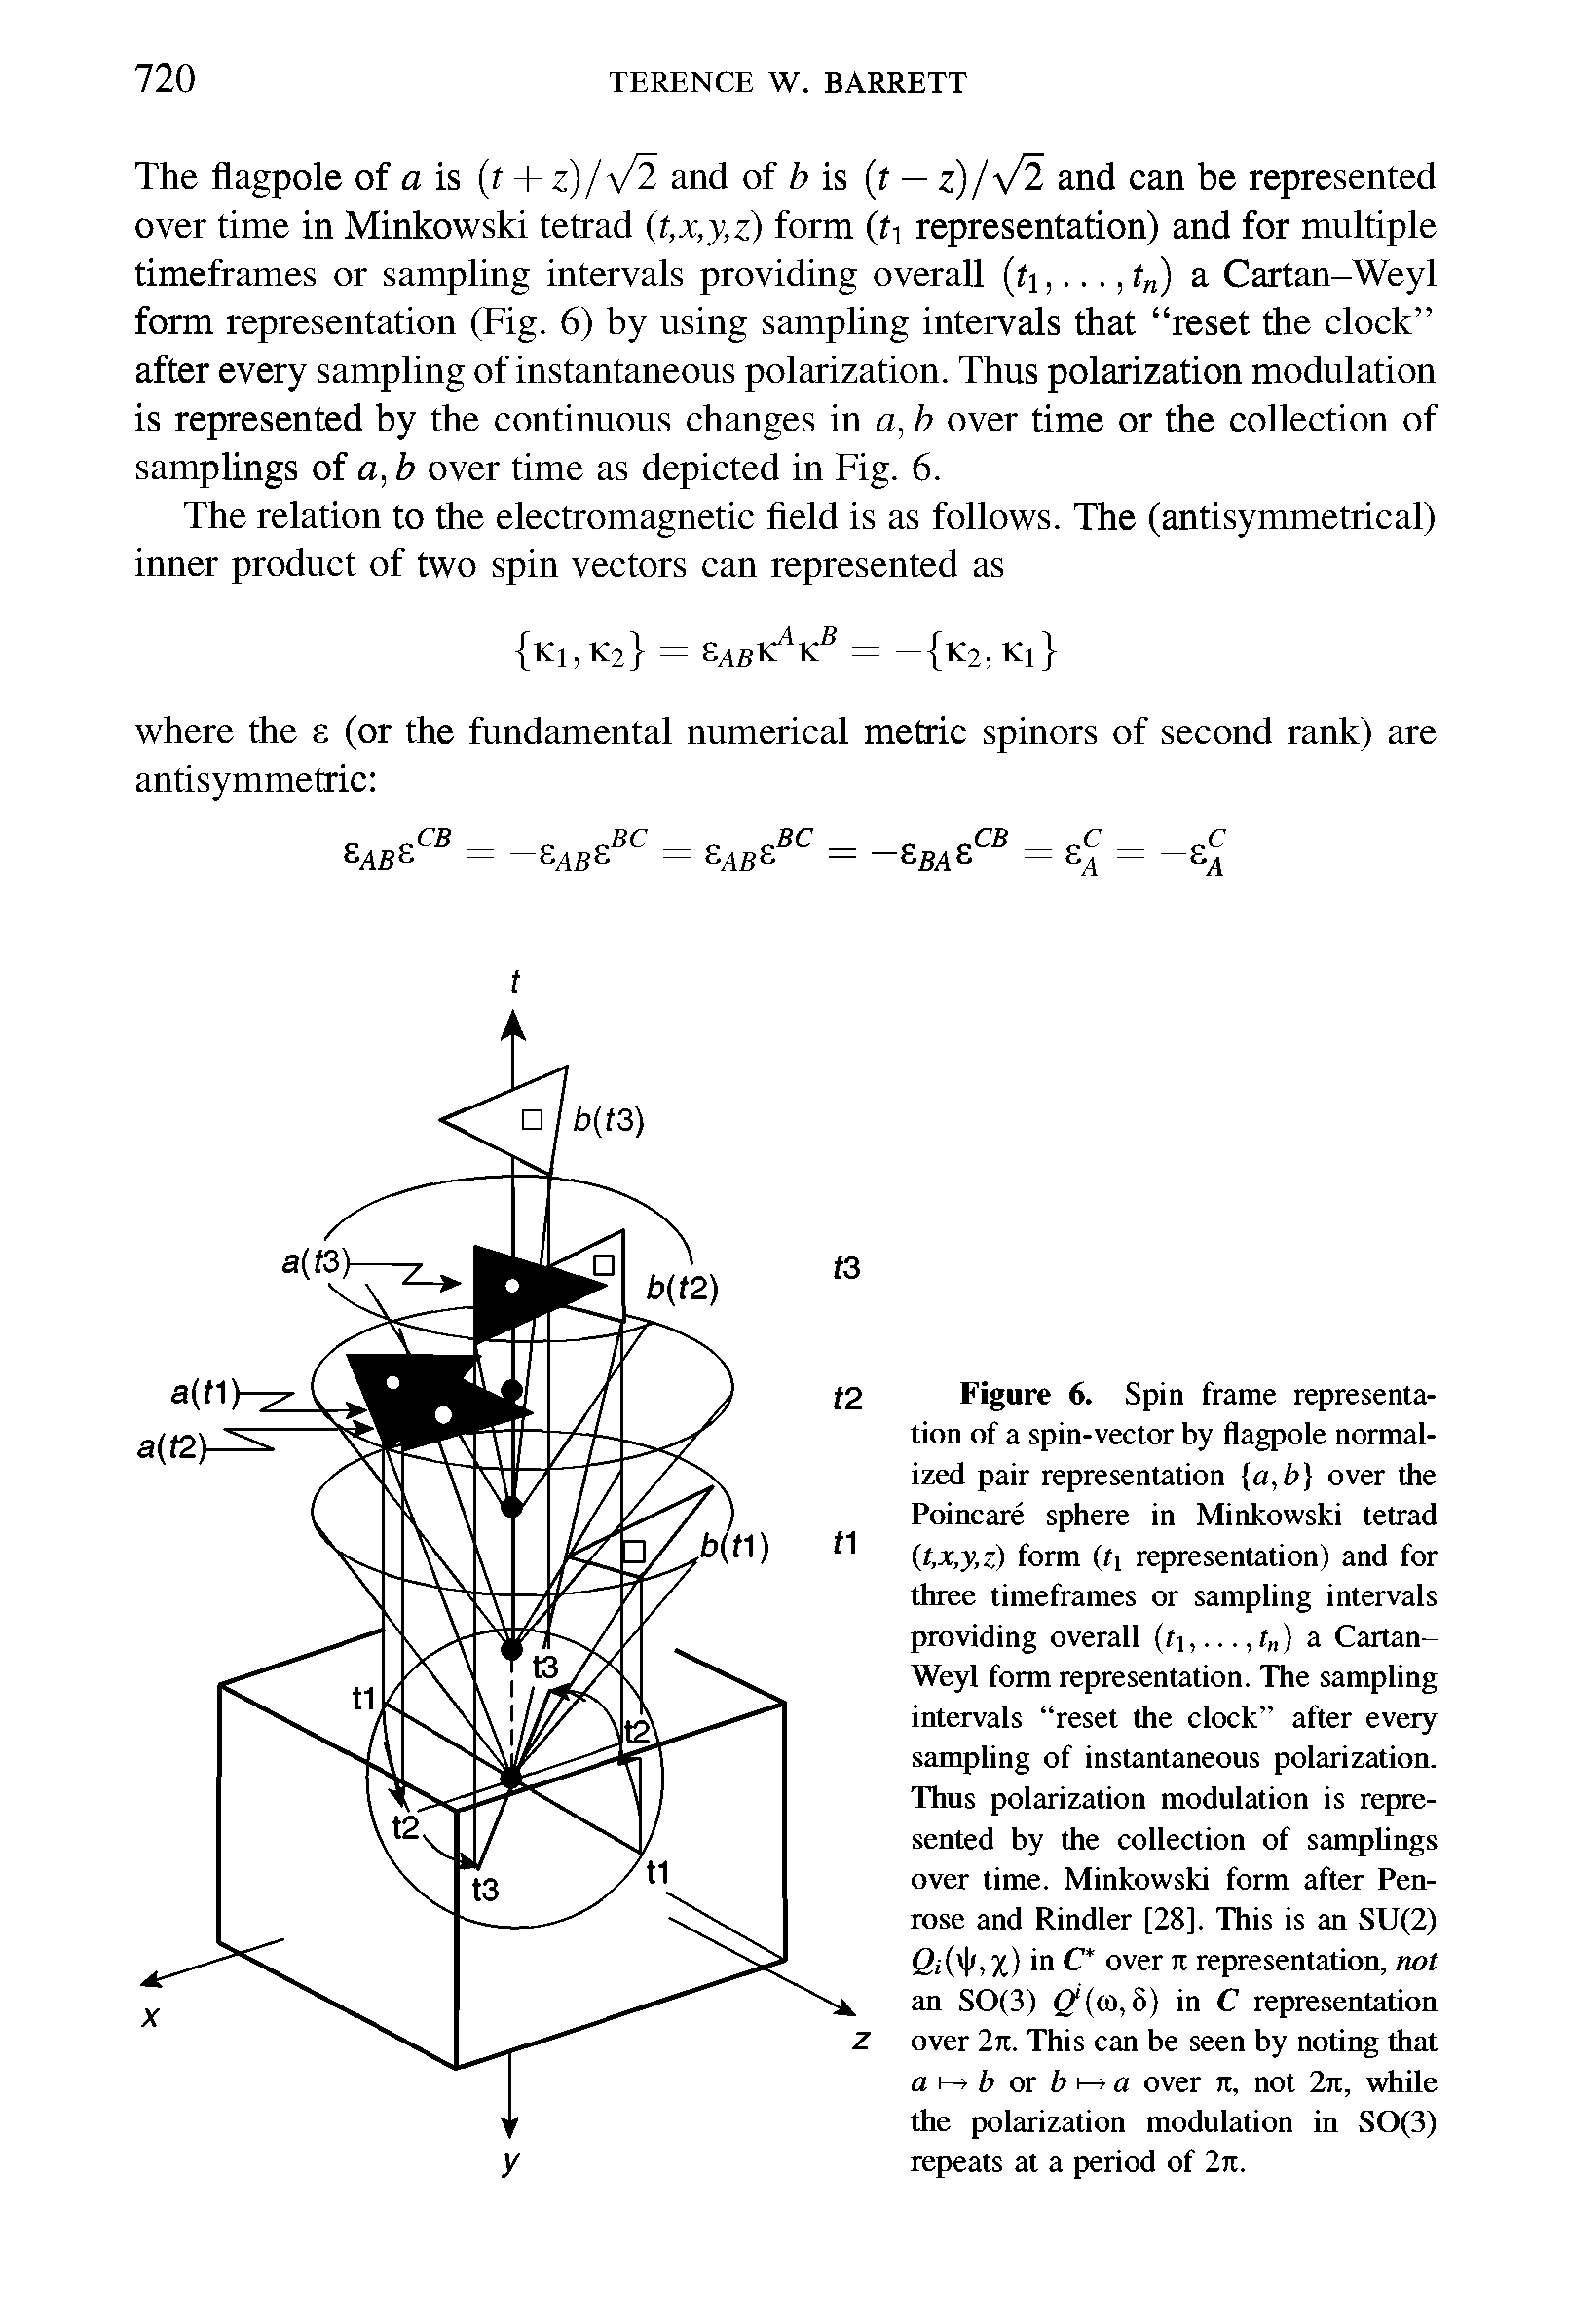 Figure 6. Spin frame representation of a spin-vector by flagpole normalized pair representation a,b over the Poincare sphere in Minkowski tetrad (l,x,y,z) form (n representation) and for three timeframes or sampling intervals providing overall (t]. r ) a Cartan-Weyl form representation. The sampling intervals reset the clock after every sampling of instantaneous polarization. Thus polarization modulation is represented by the collection of samplings over time. Minkowski form after Penrose and Rindler [28]. This is an SU(2) Gd hx) m C over it representation, not an SO(3) Q(to, 8) in C representation over 2it. This can be seen by noting that an b or bt-z a over it, not 2n, while the polarization modulation in SO(3) repeats at a period of 2it.